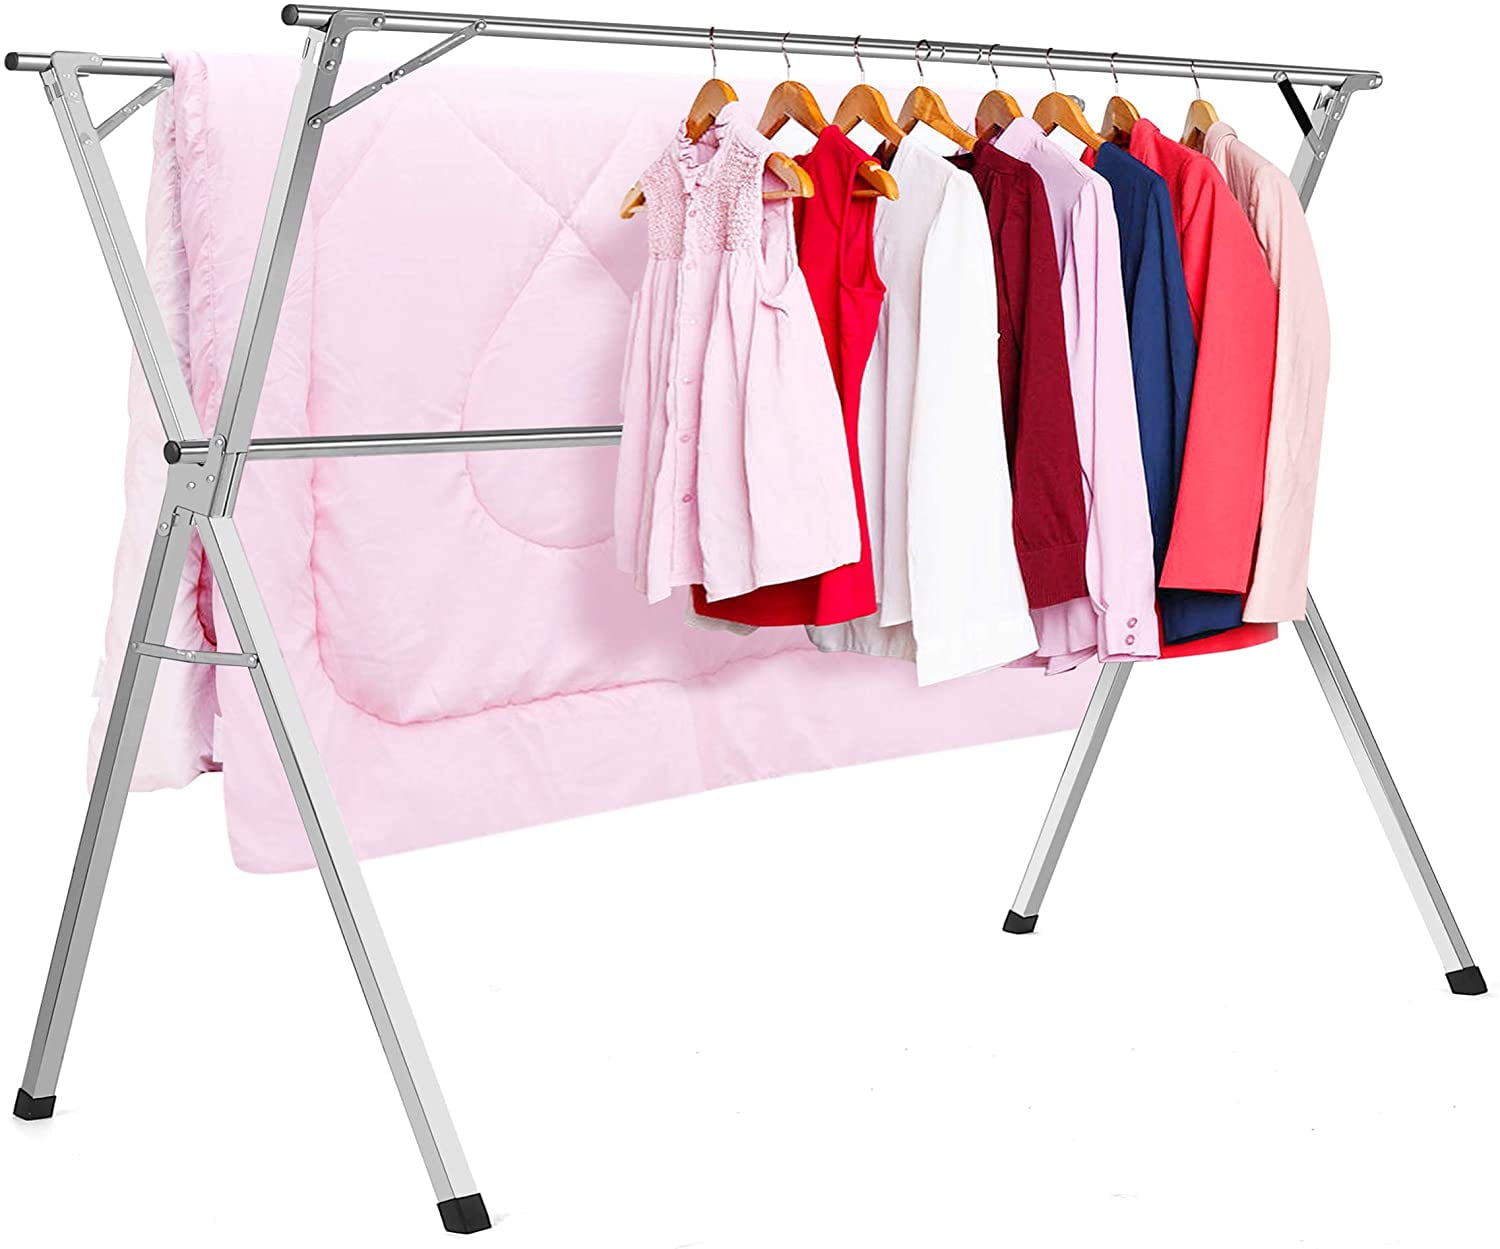 71" Laundry Clothes Storage Drying Rack Portable Folding Dryer Hanger Heavy Duty 